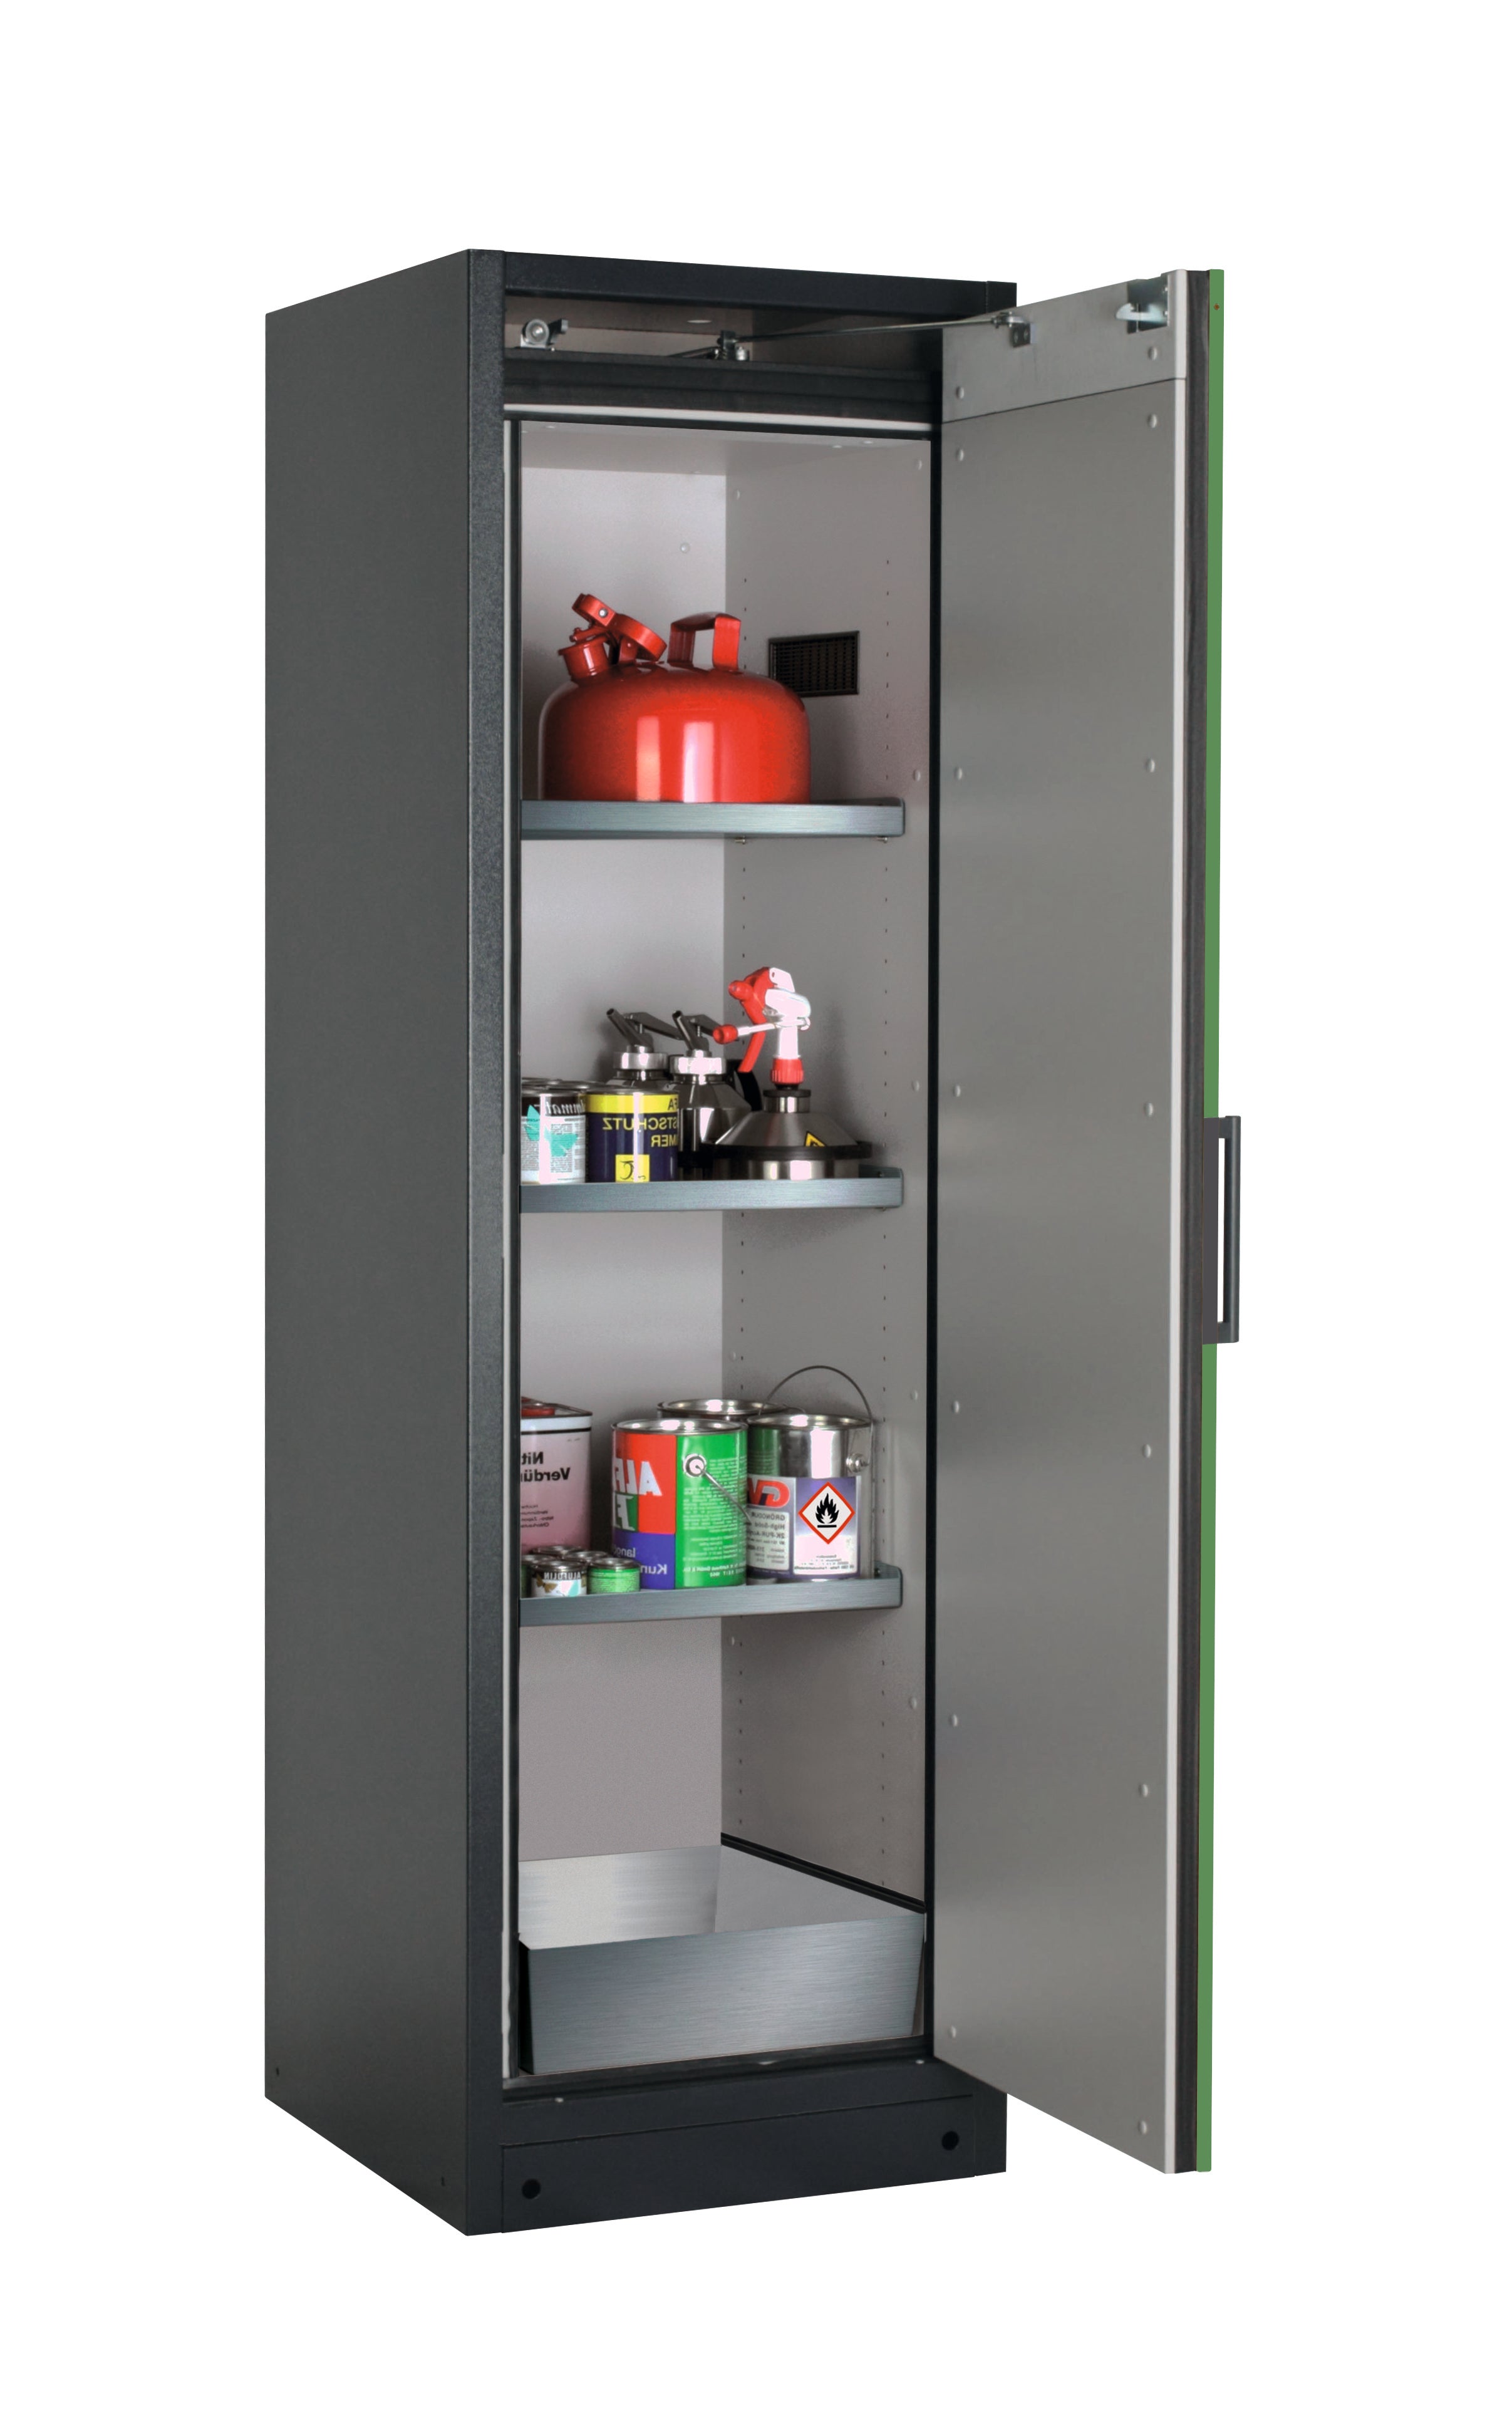 Type 90 safety storage cabinet Q-CLASSIC-90 model Q90.195.060.R in reseda green RAL 6011 with 3x shelf standard (stainless steel 1.4301),